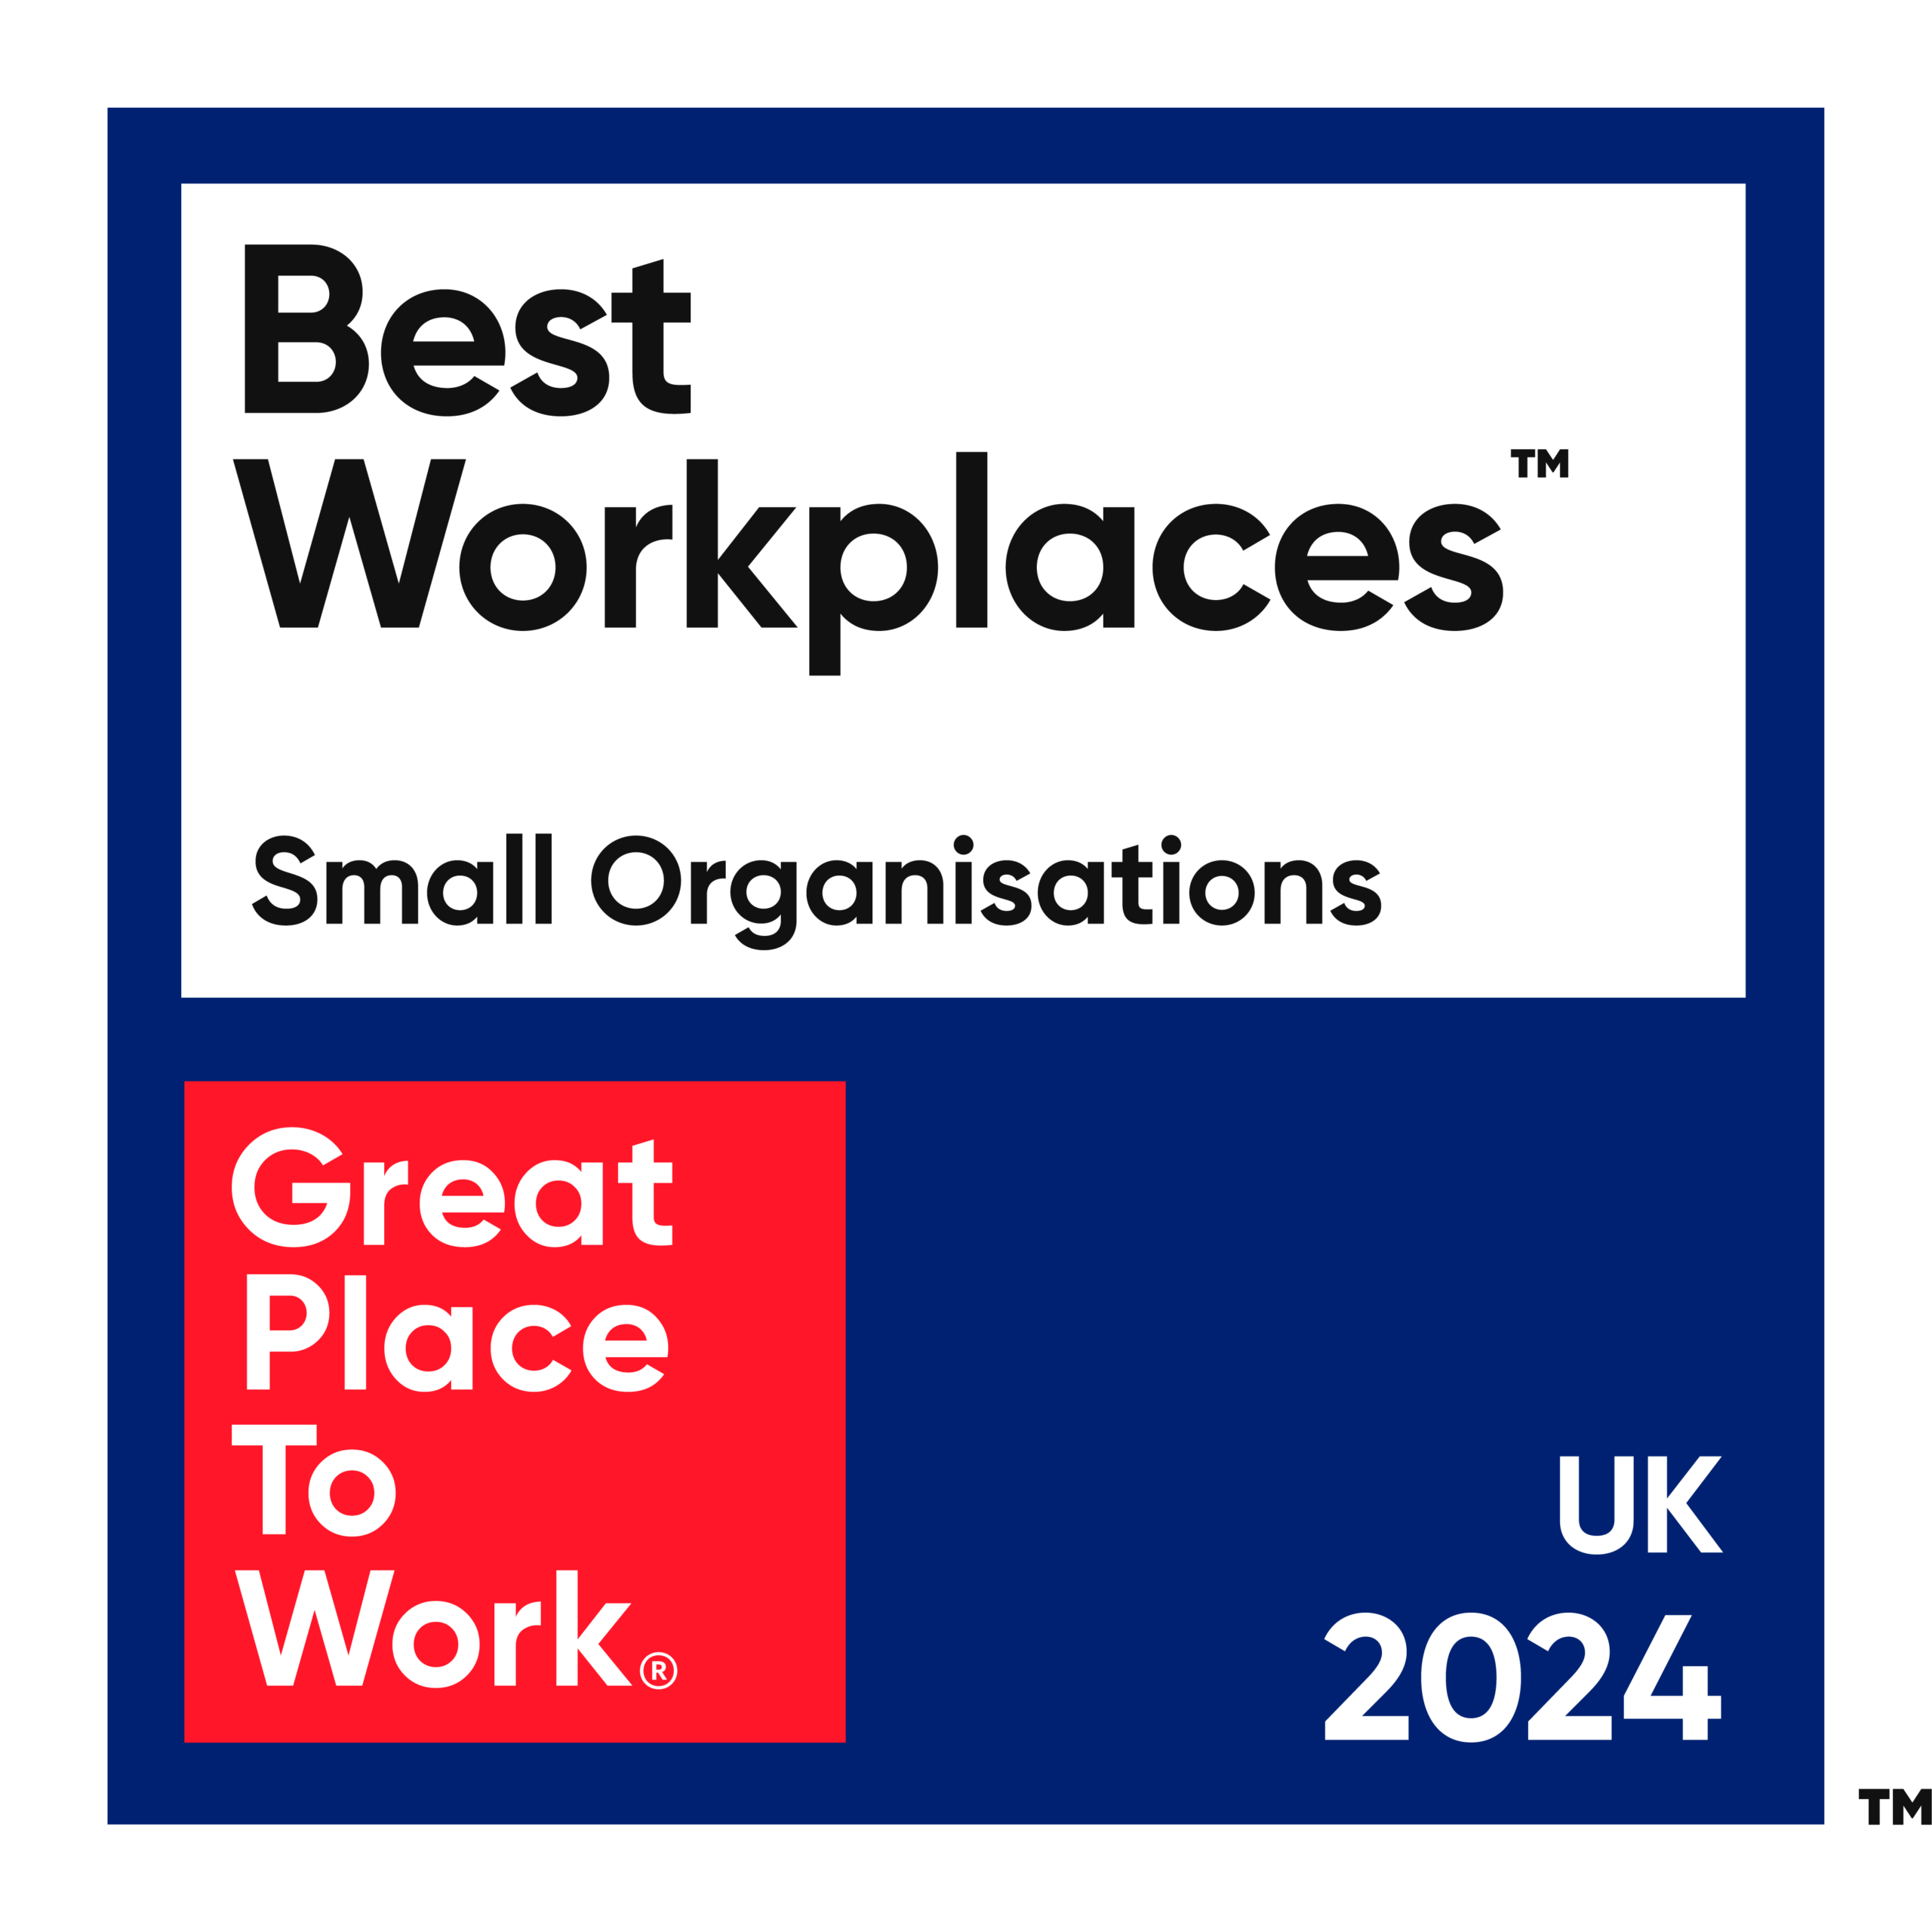 Great place to work award, small organisations